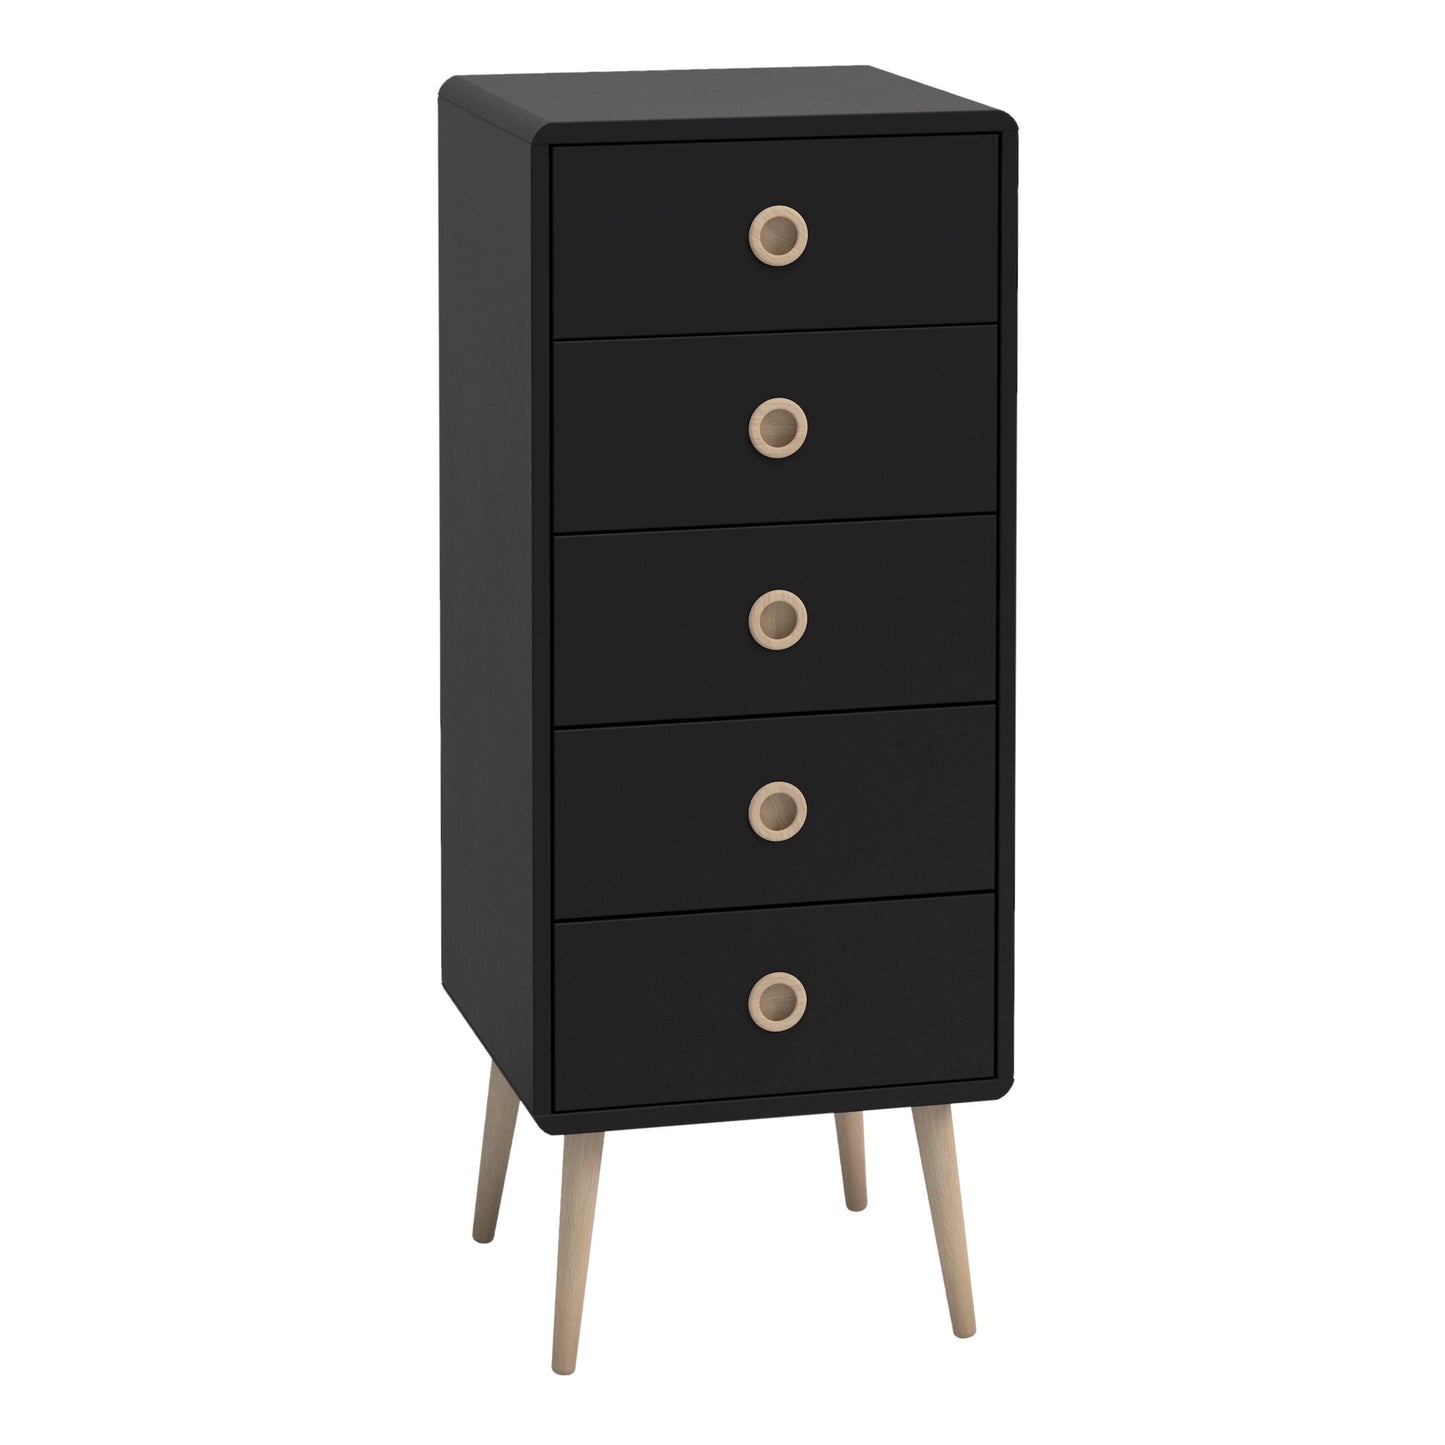 Furniture To Go Softline 5 Drawer Narrow Black Painted